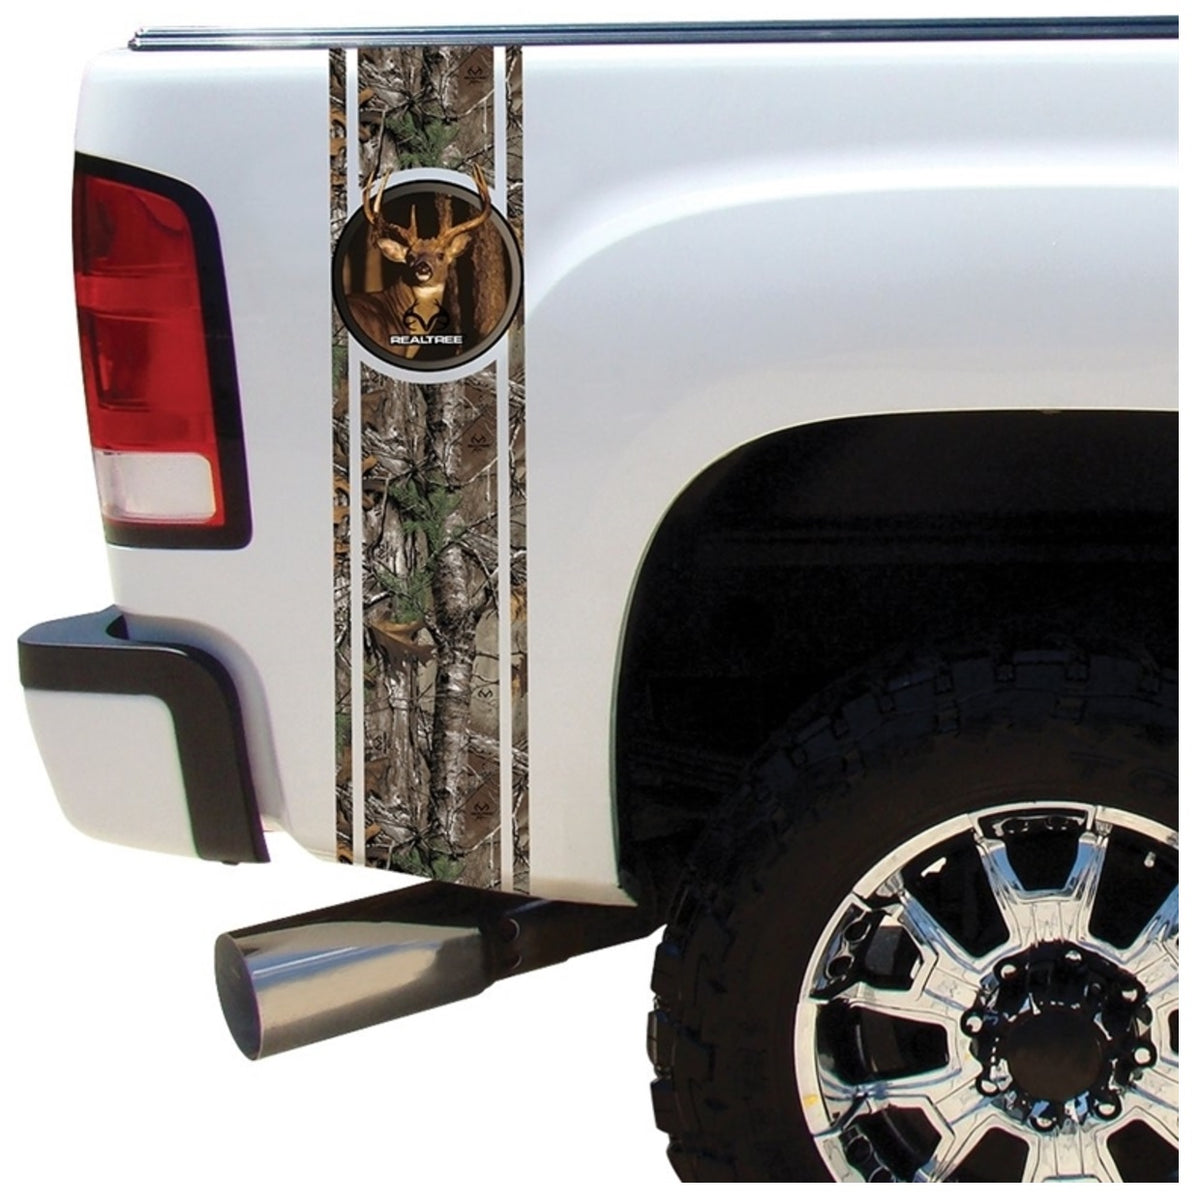 Realtree RT-BB-WT-XT Duck Bed Band Decal Kit, 10" x 40"